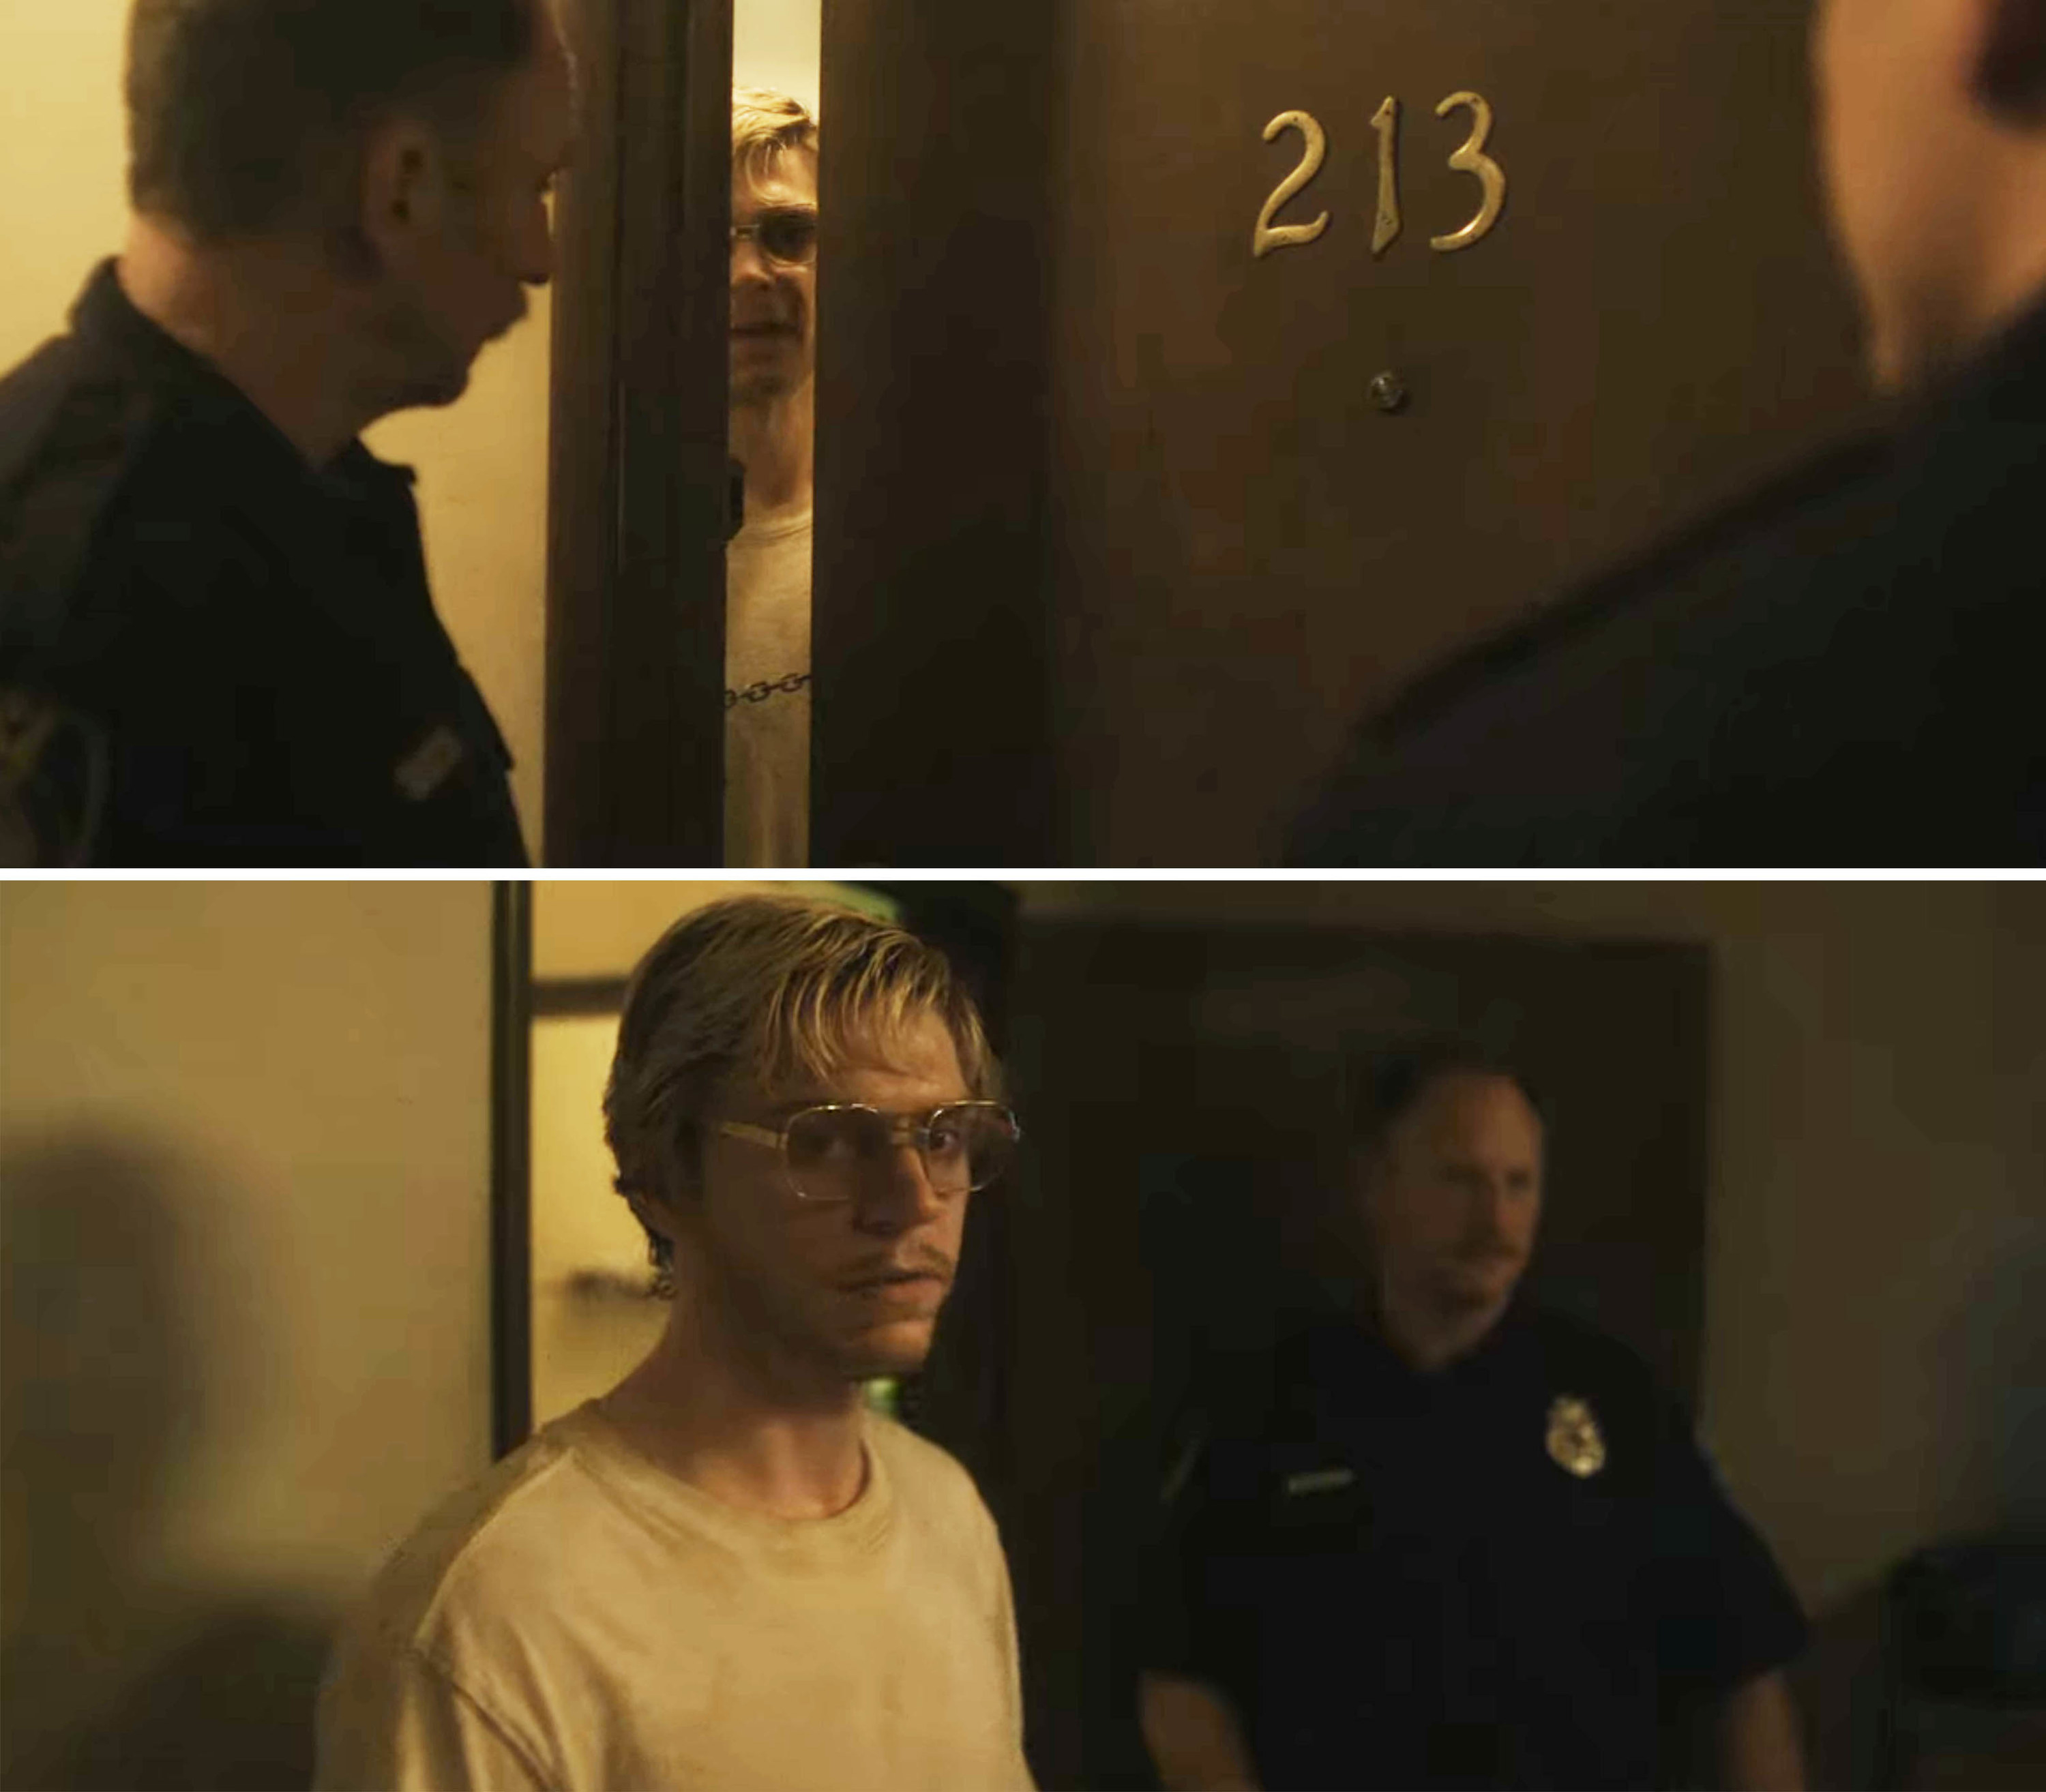 Evan as Jeffrey with police officers in his apartment